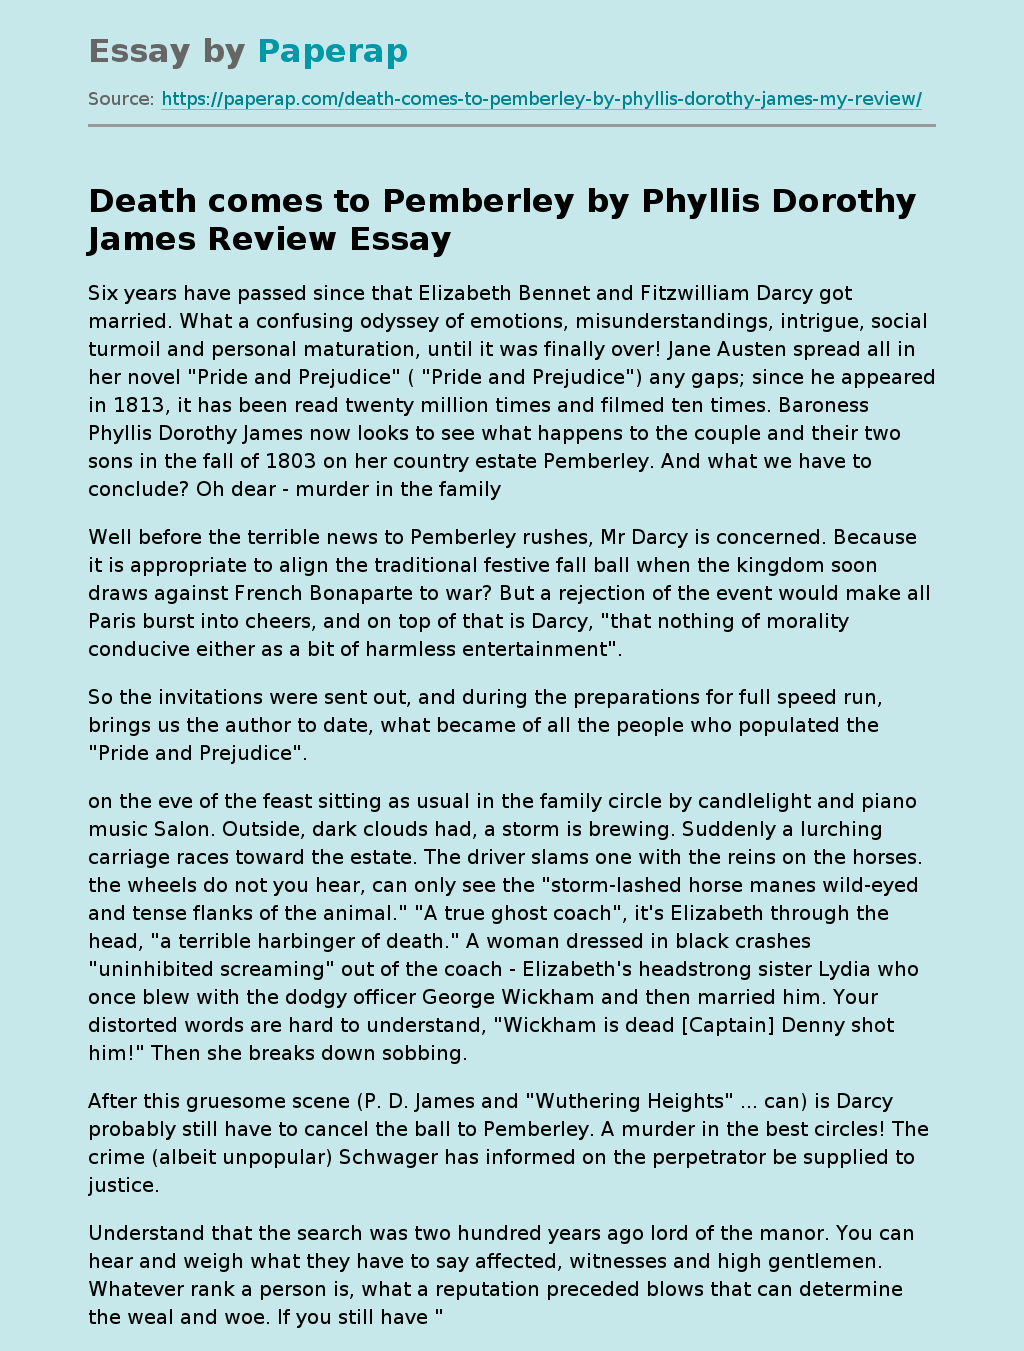 Death comes to Pemberley by Phyllis Dorothy James Review